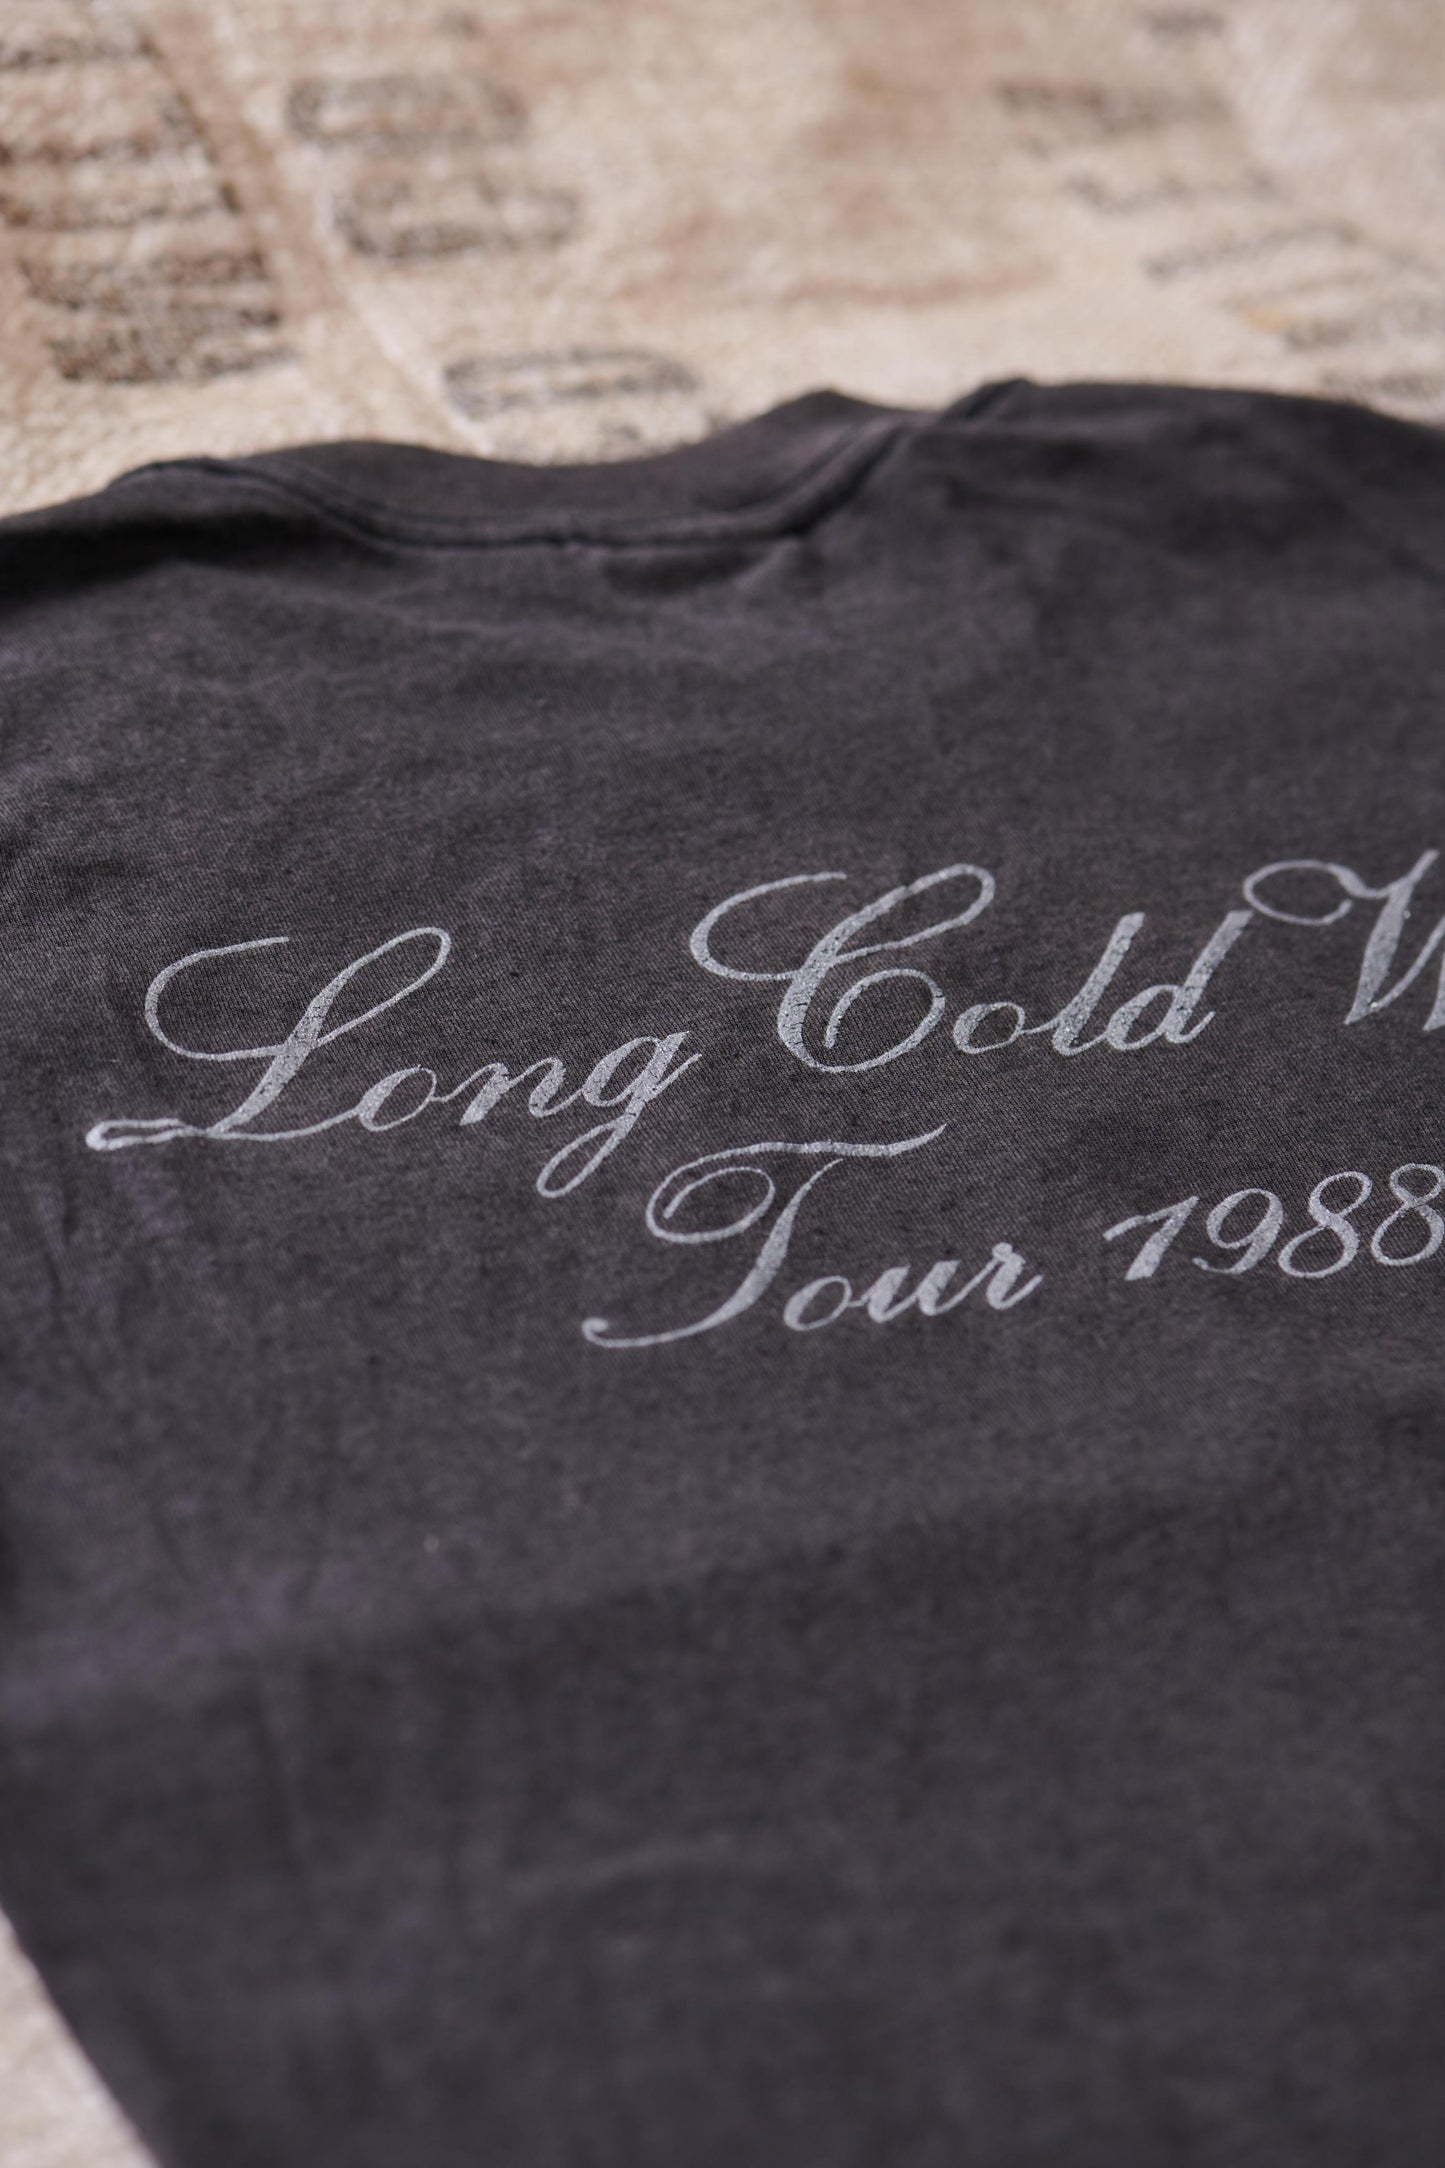 80s Cinderella Long Cold Winter Tour Single Stitched Band Tee